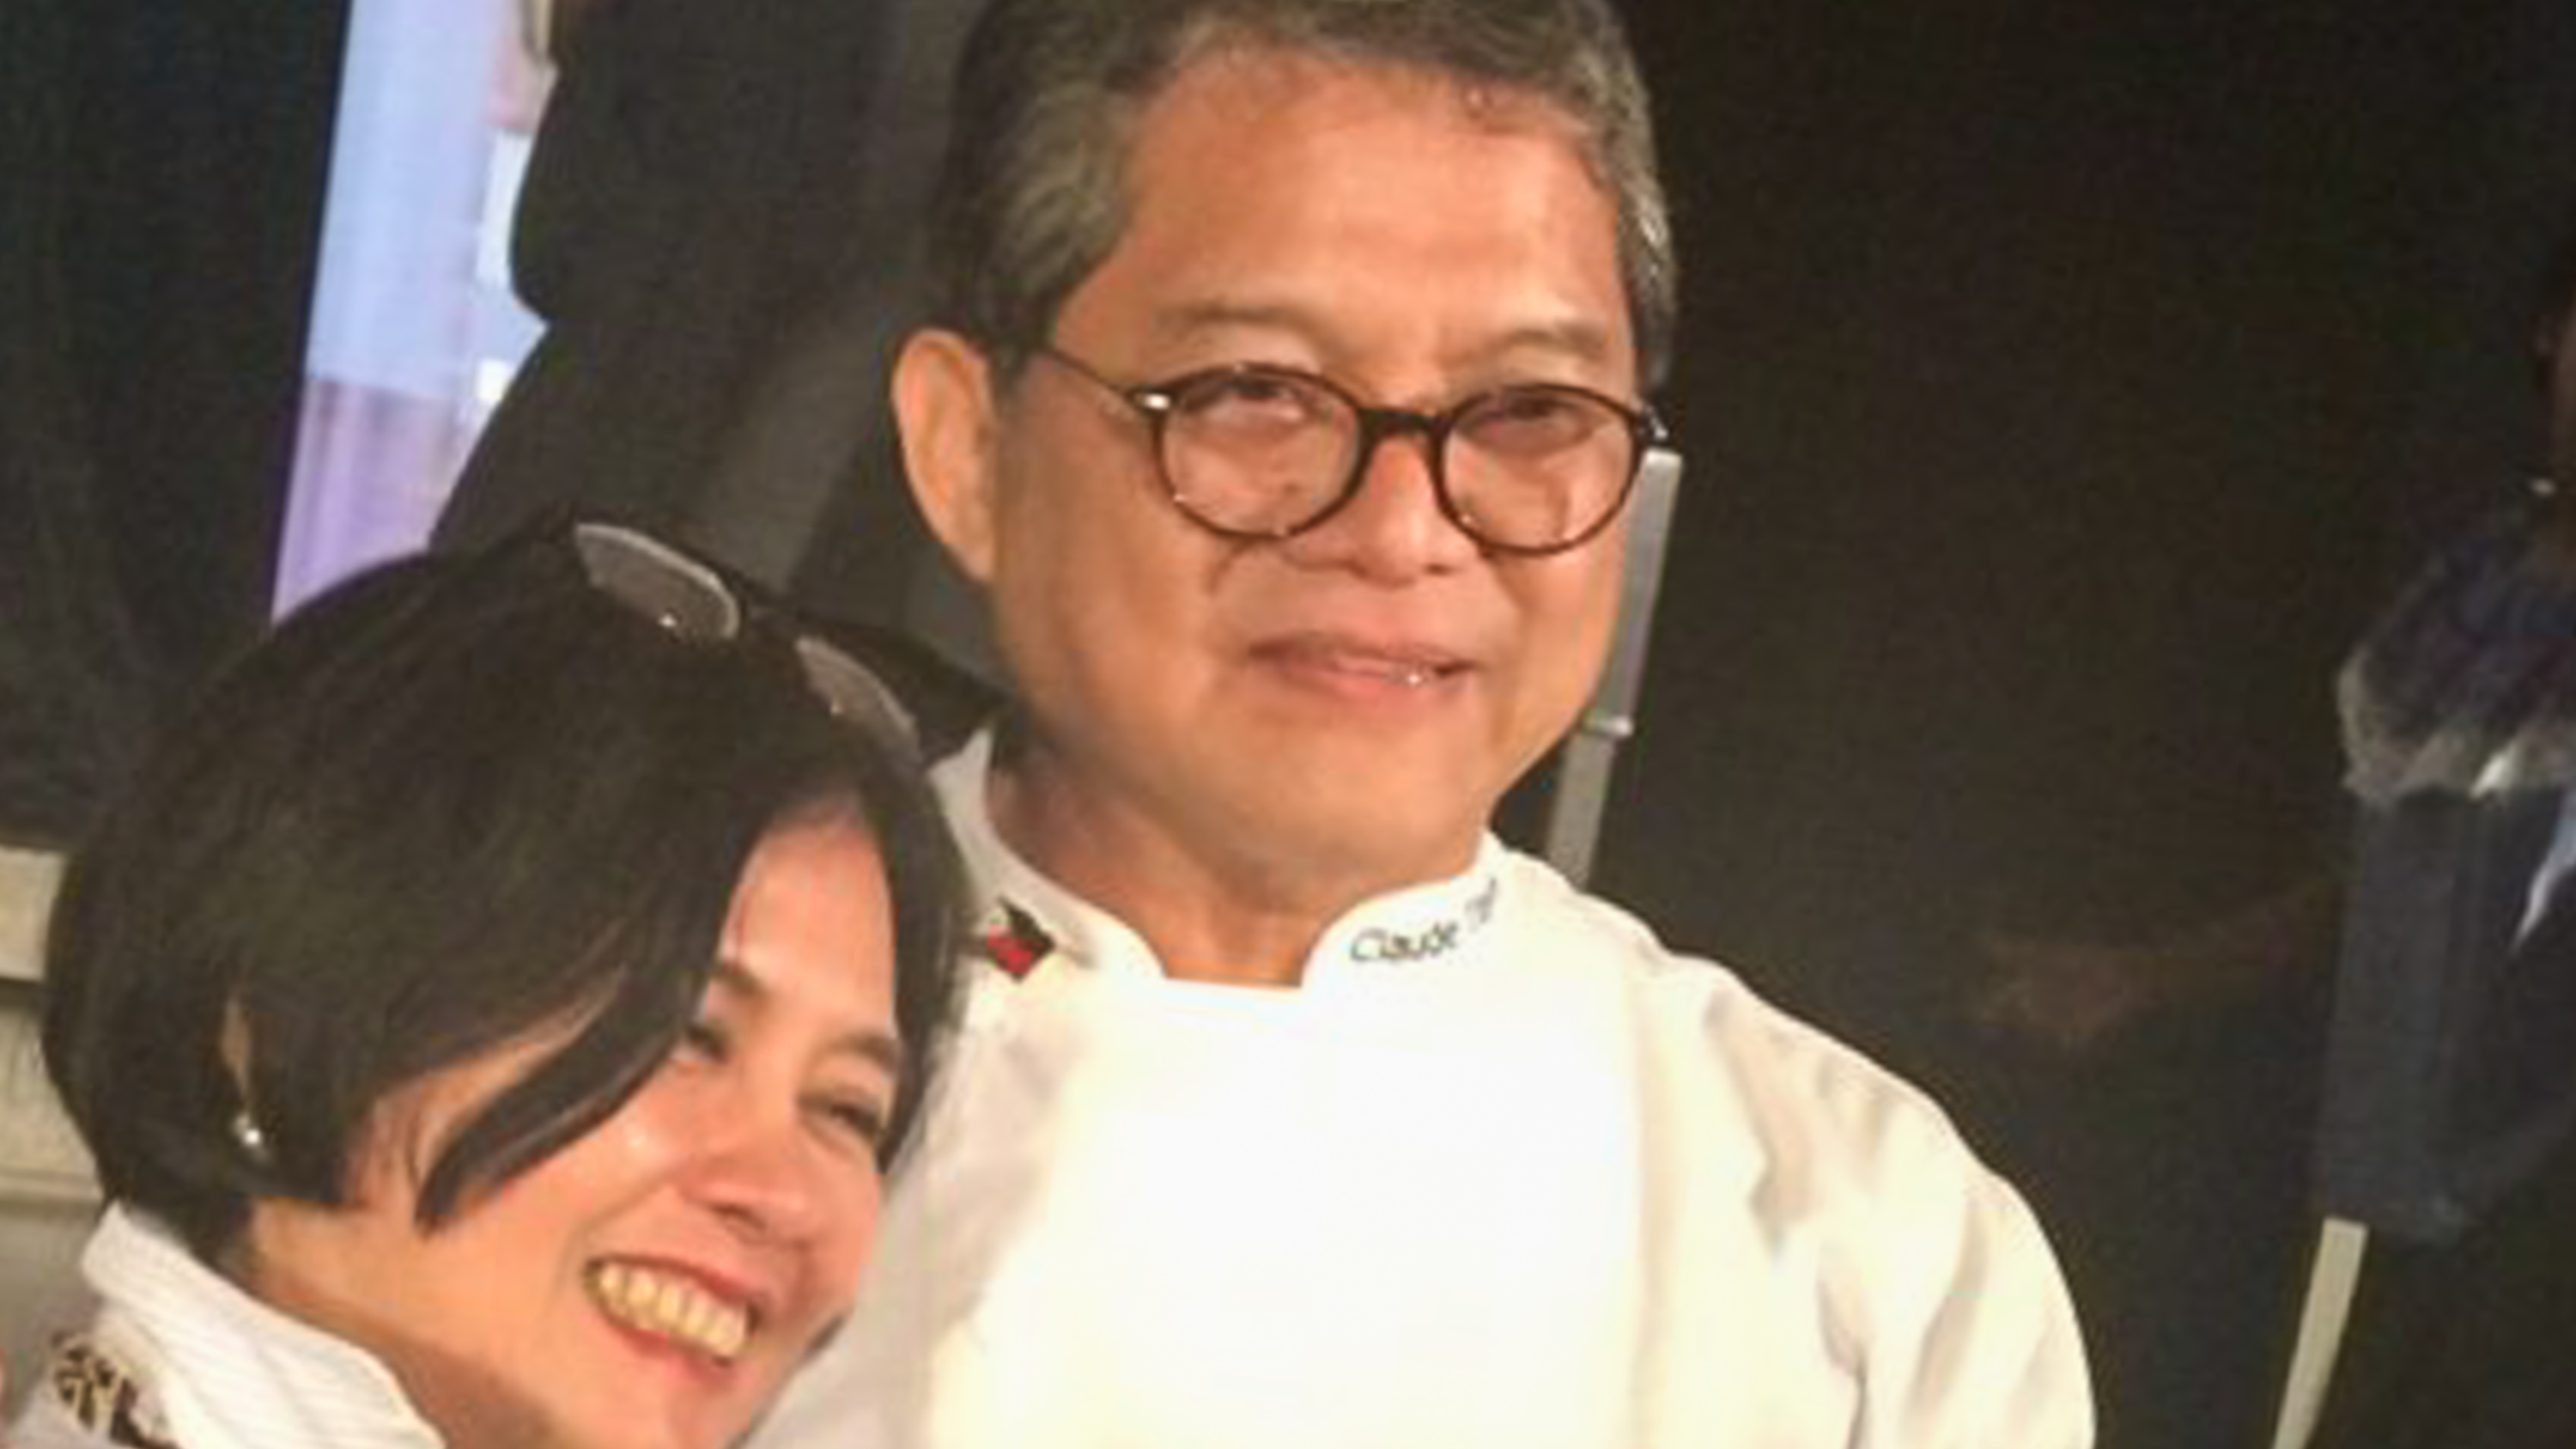 CLAUDE TAYAG. The chef wins the People's Choice Award at the annual Embassy Chef's Challenge. Screengrab from Twitter/DCSportsEnt 